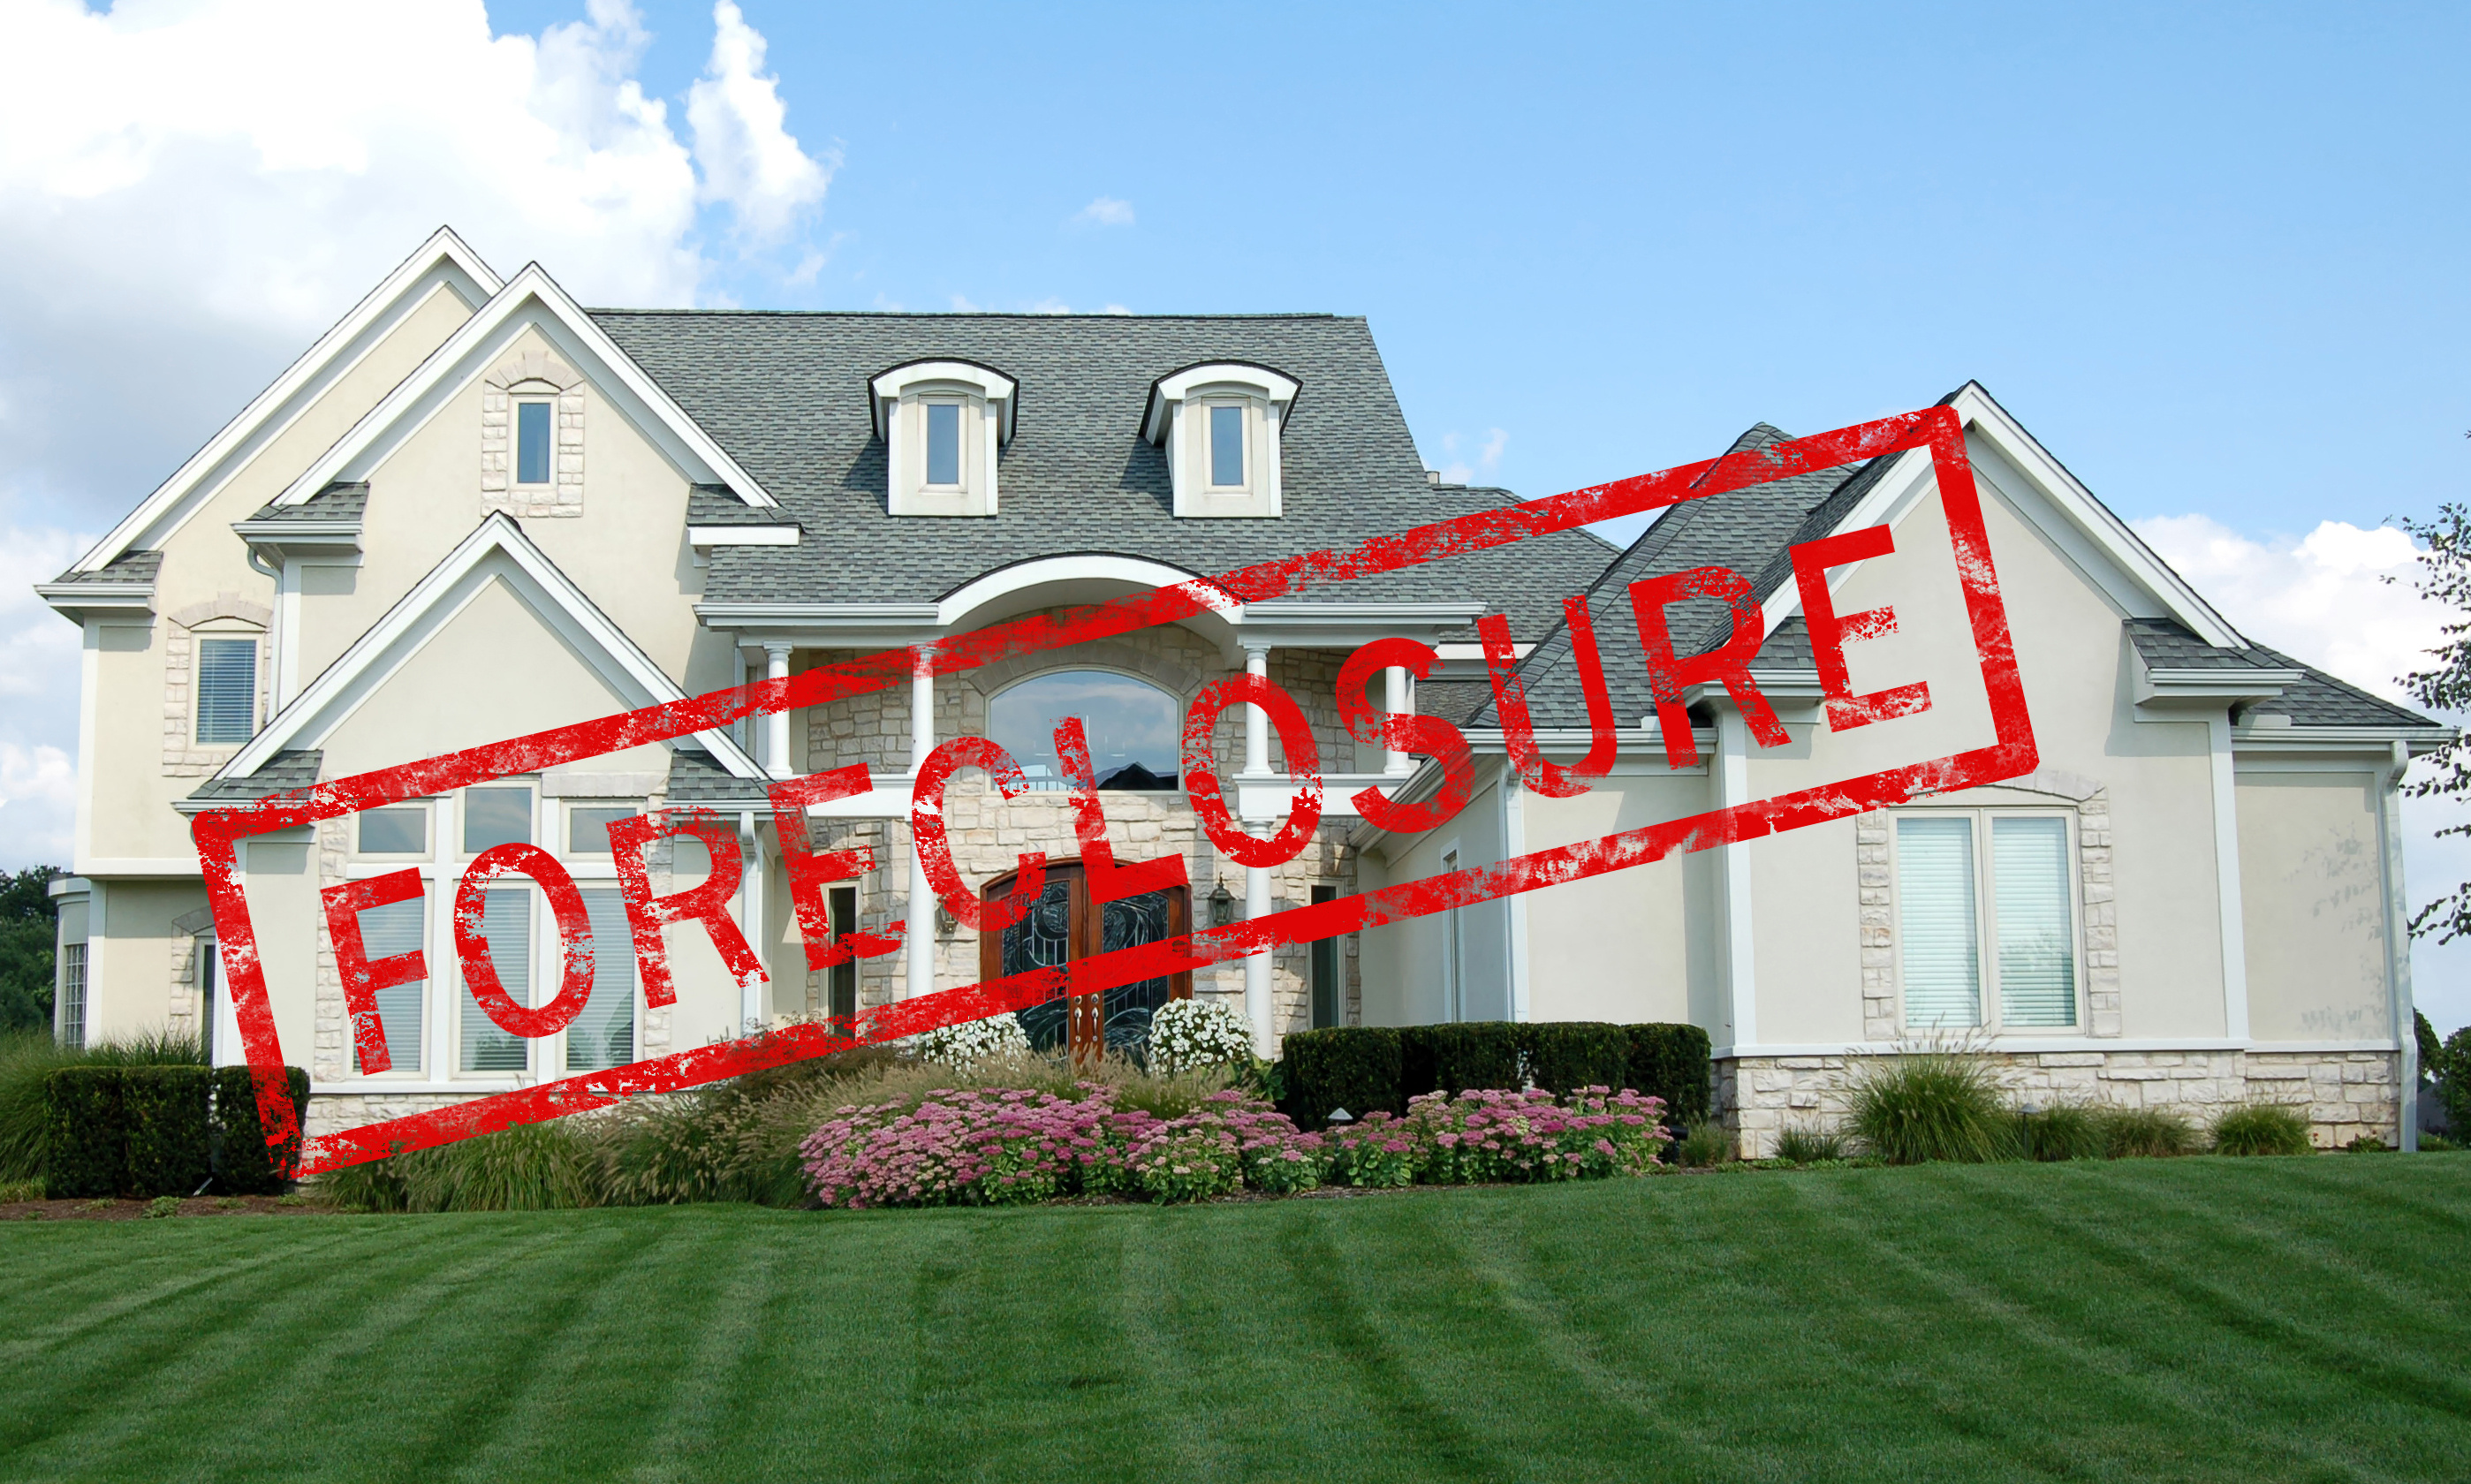 Call Liberto Appraisal Services, Inc. when you need appraisals pertaining to Brevard foreclosures